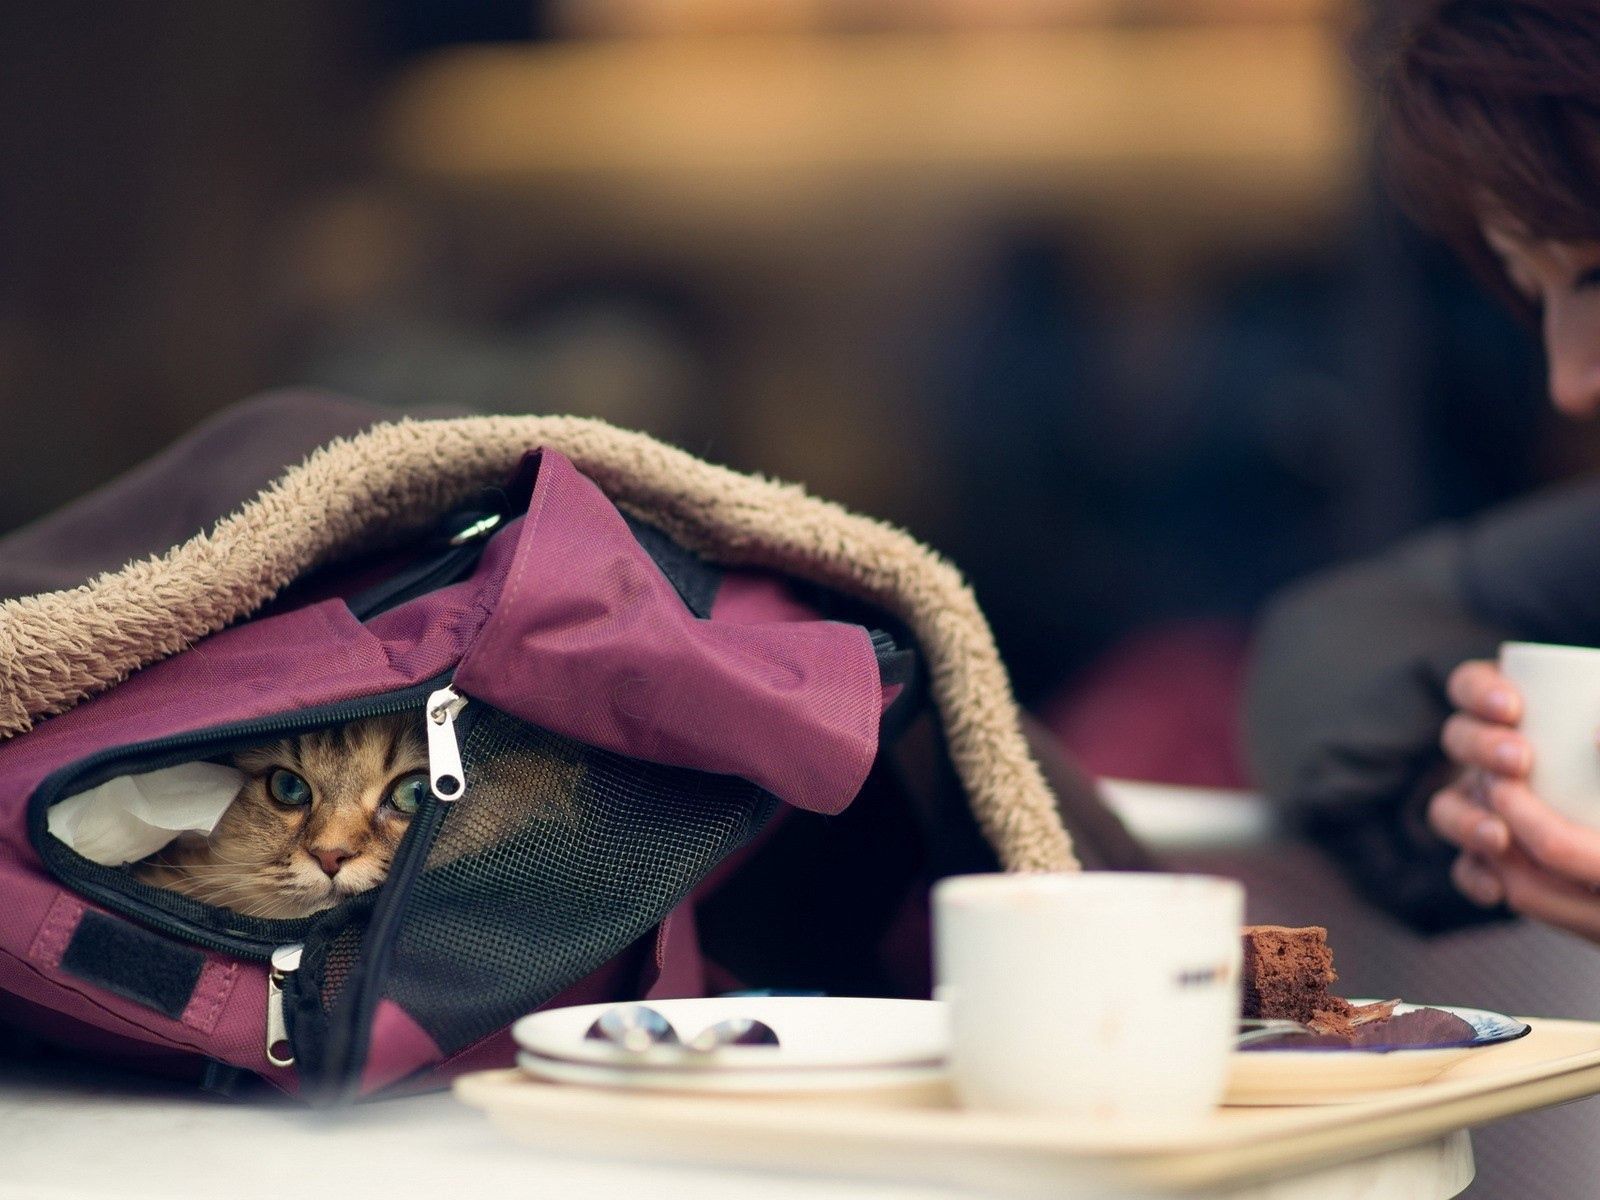 The cat hid in a backpack of the girl Desktop wallpaper 1600x1200